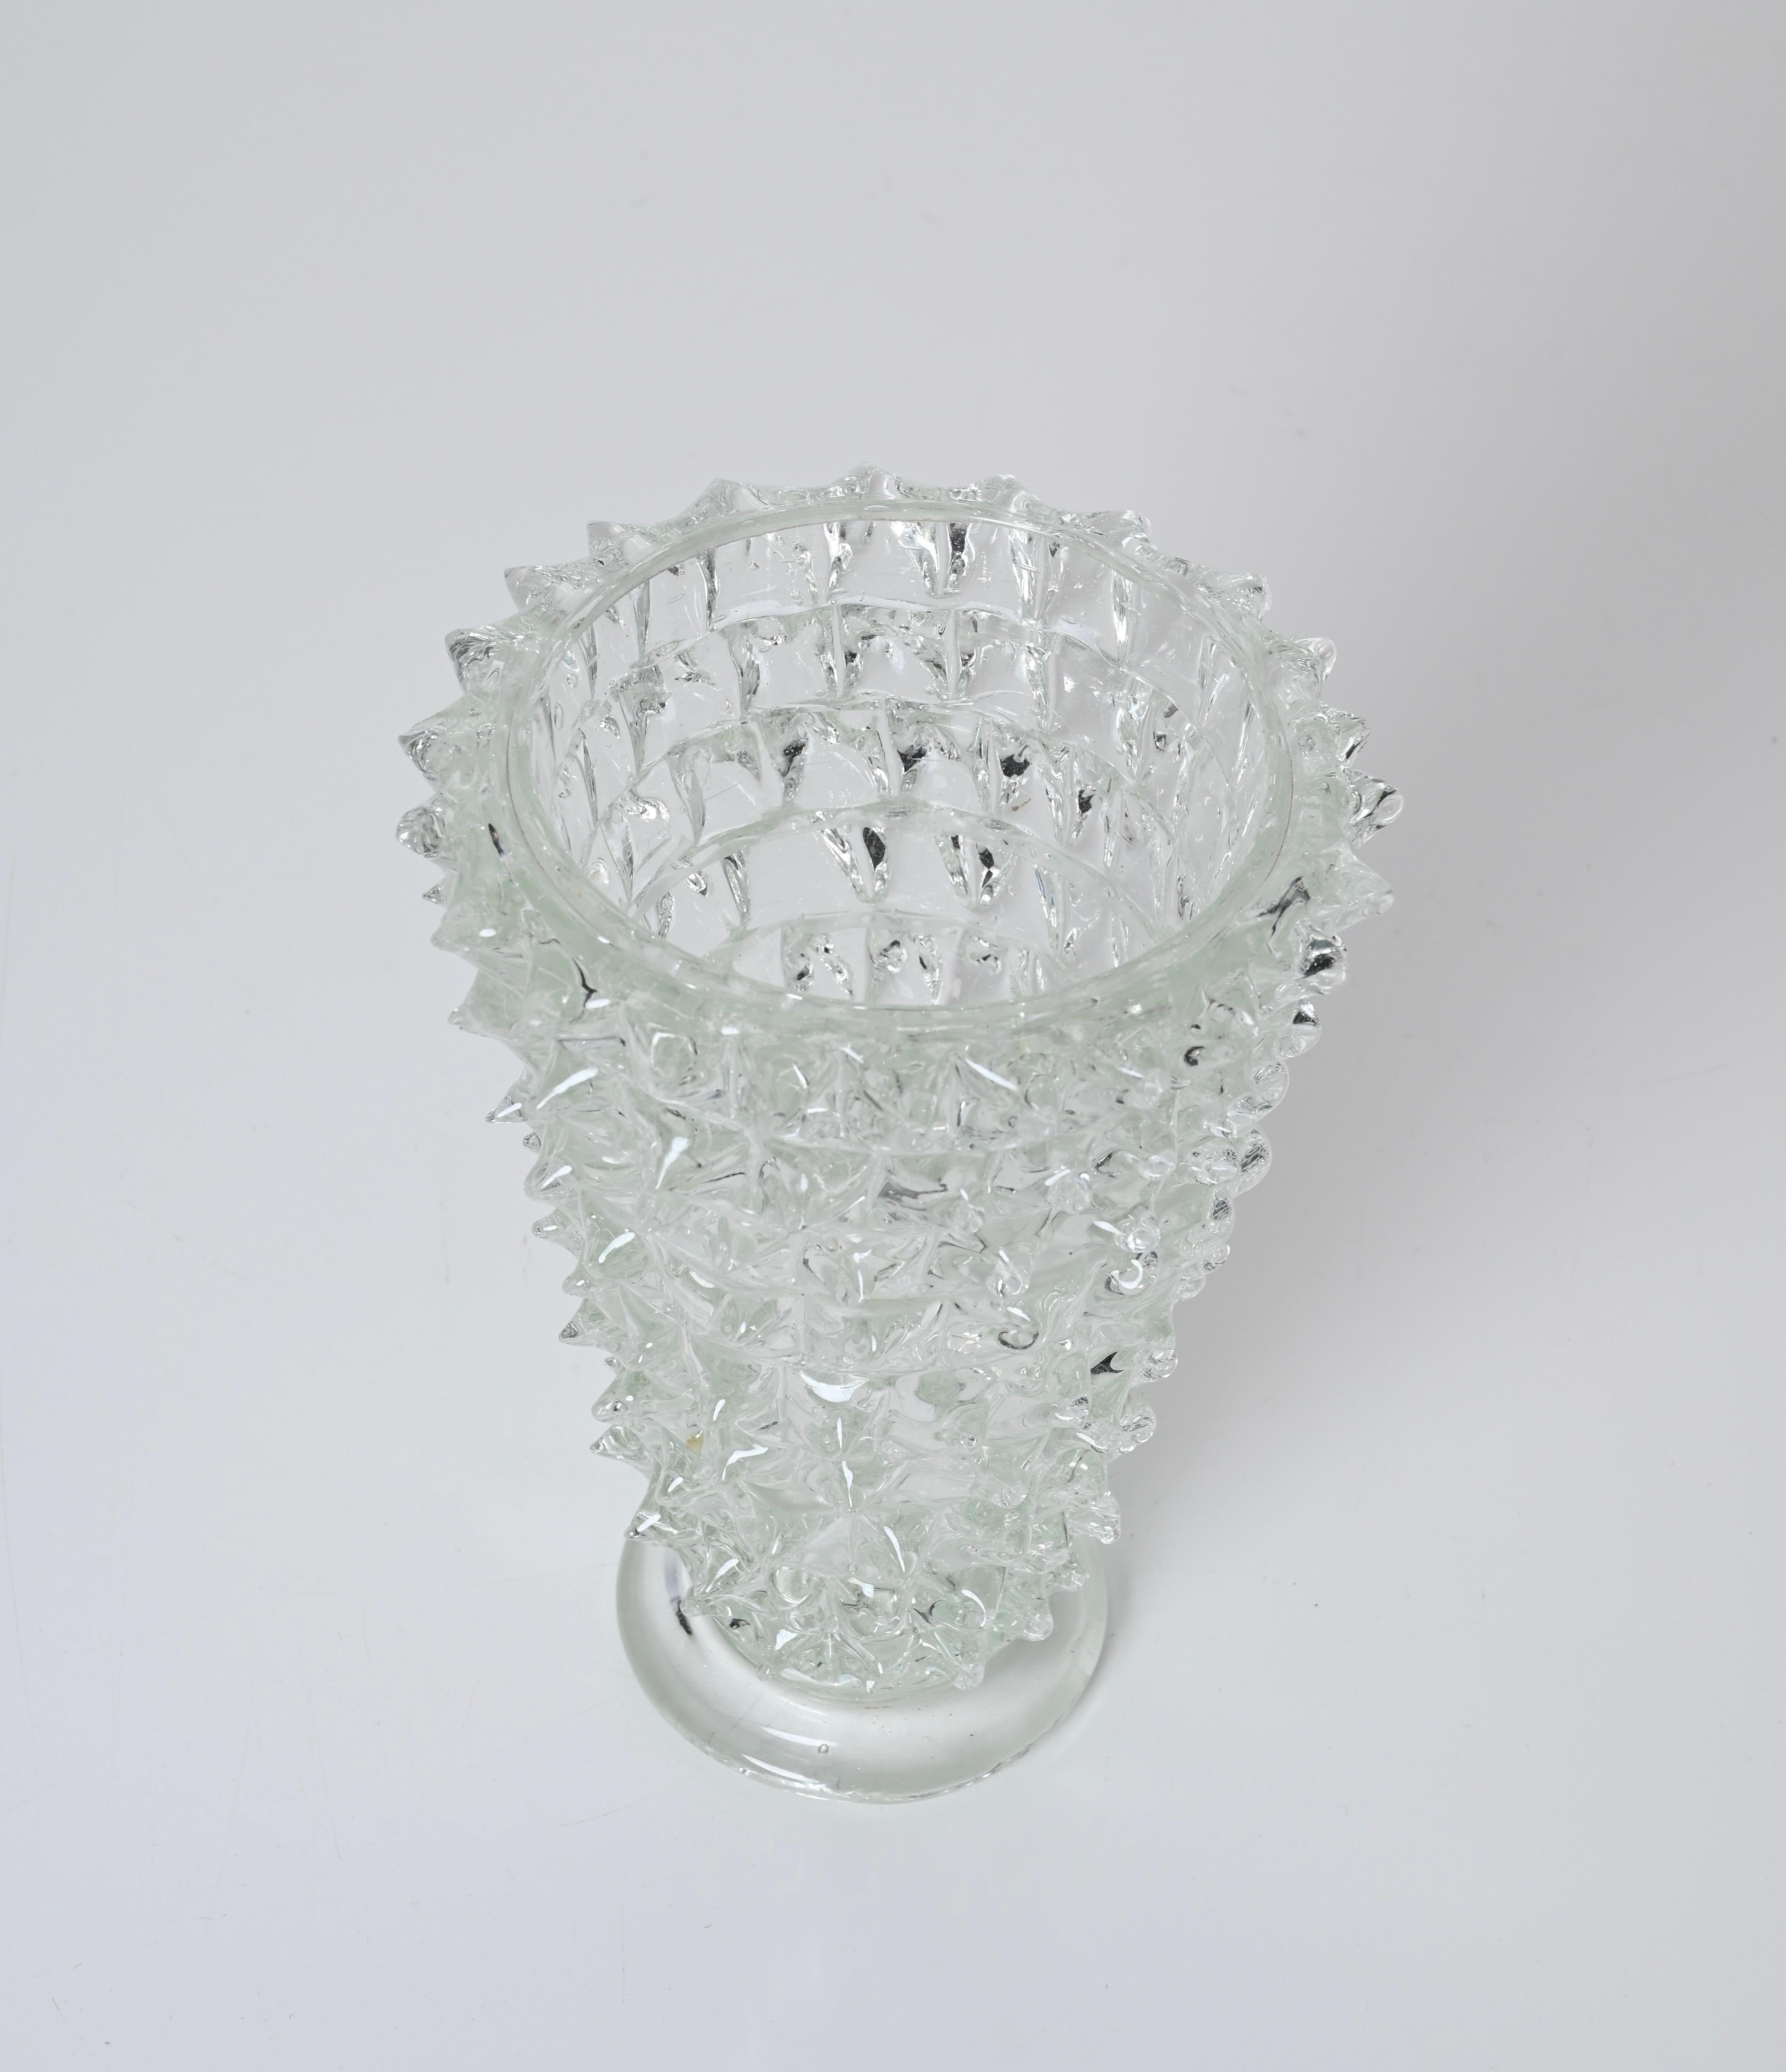 Rostrato Murano Glass Vase by Ercole Barovier for Barovier & Toso, Italy 1940s 2